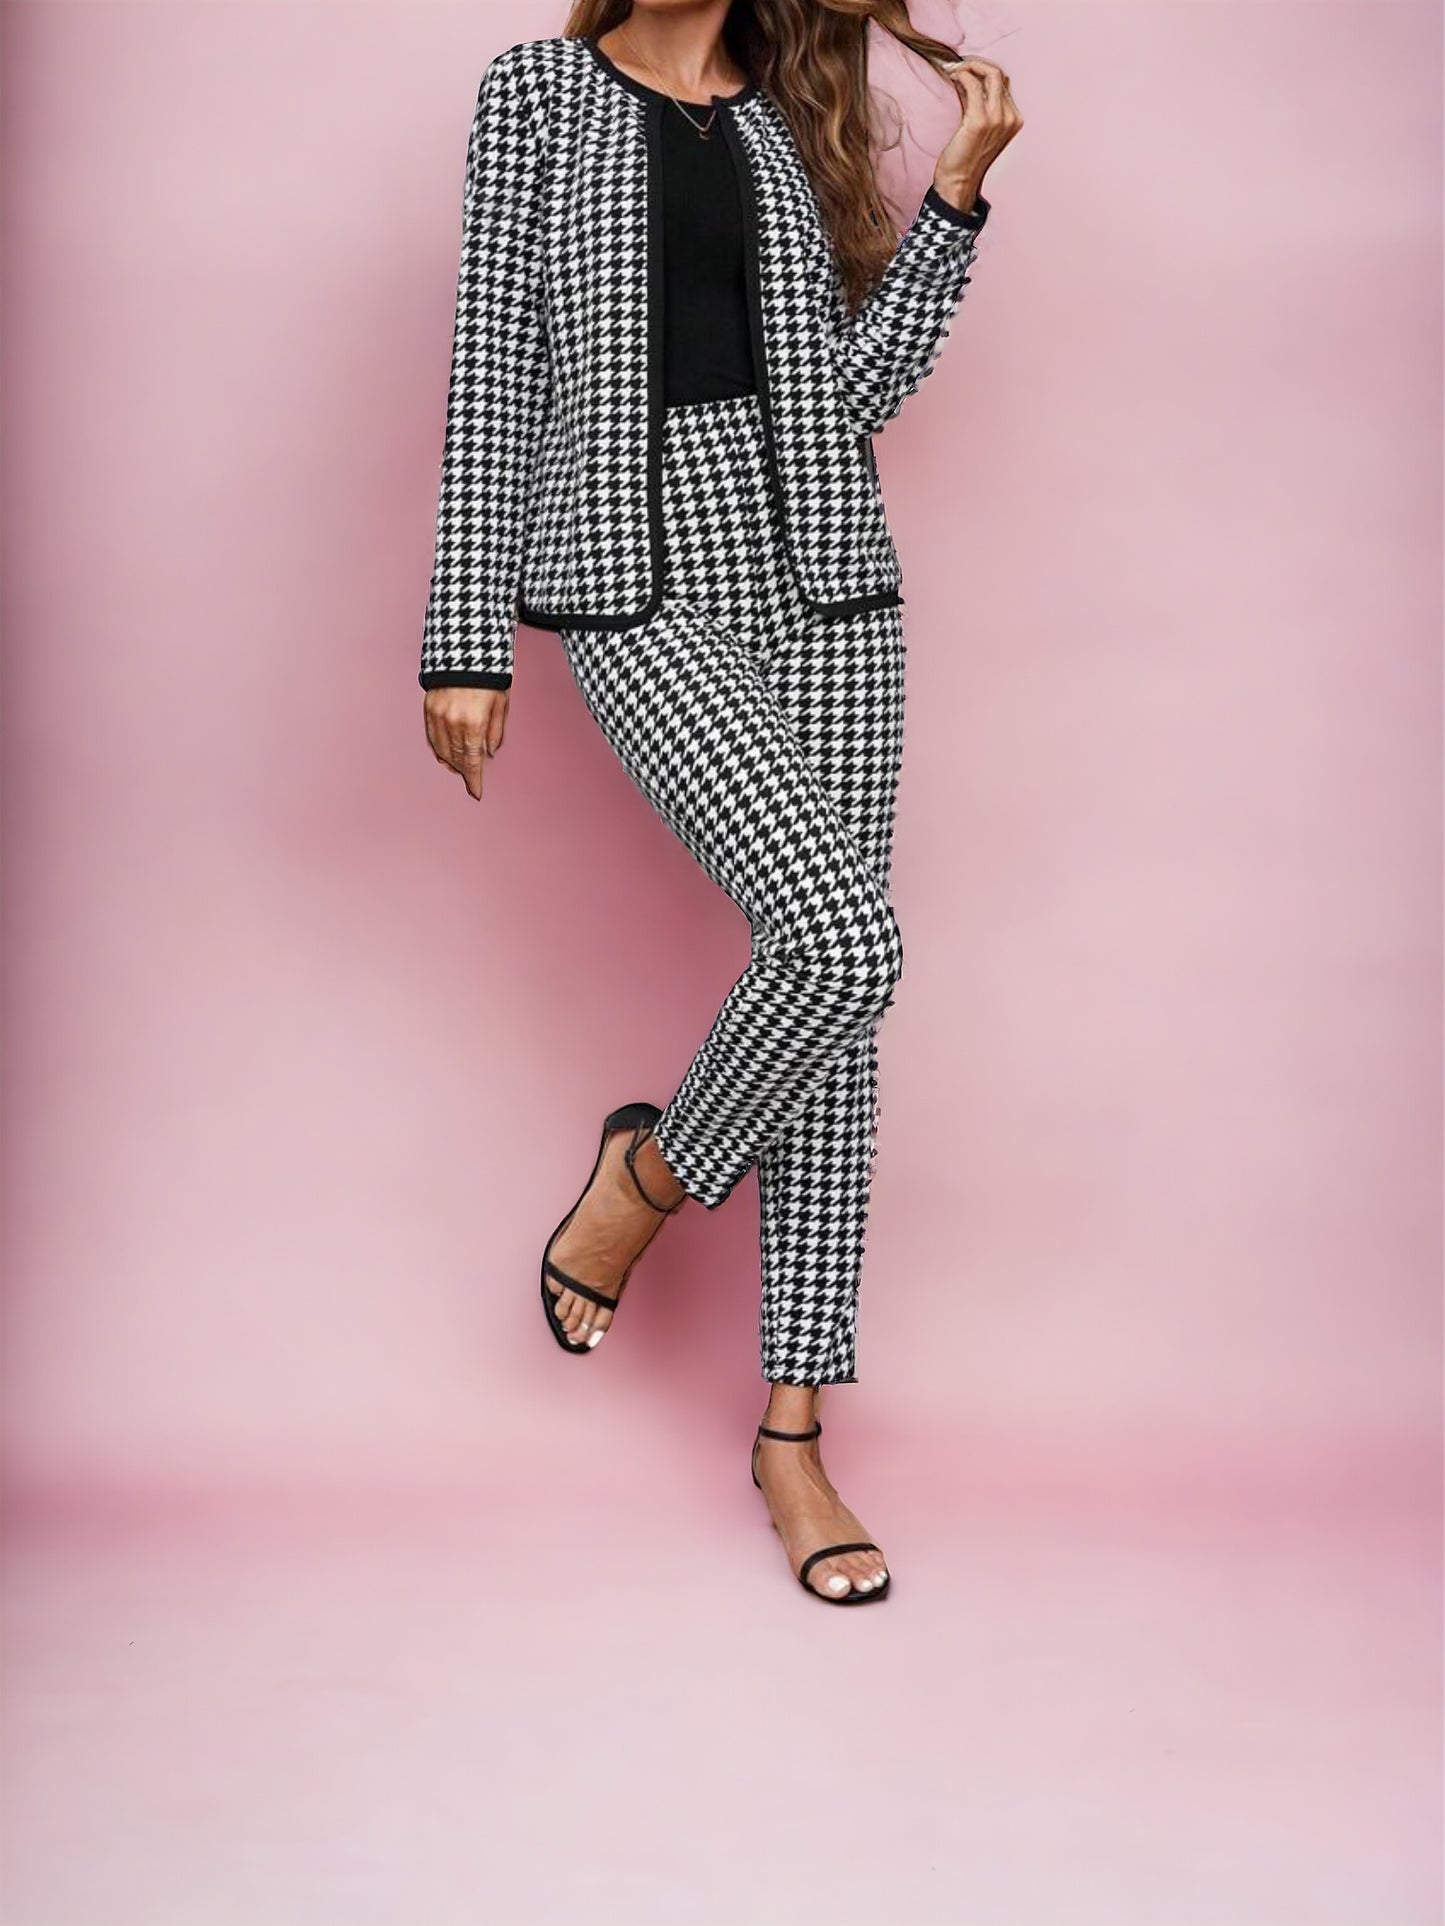 Houndstooth Print Two-Piece Set, Open Front Jacket & Pants (US Sizes 4 - 20)